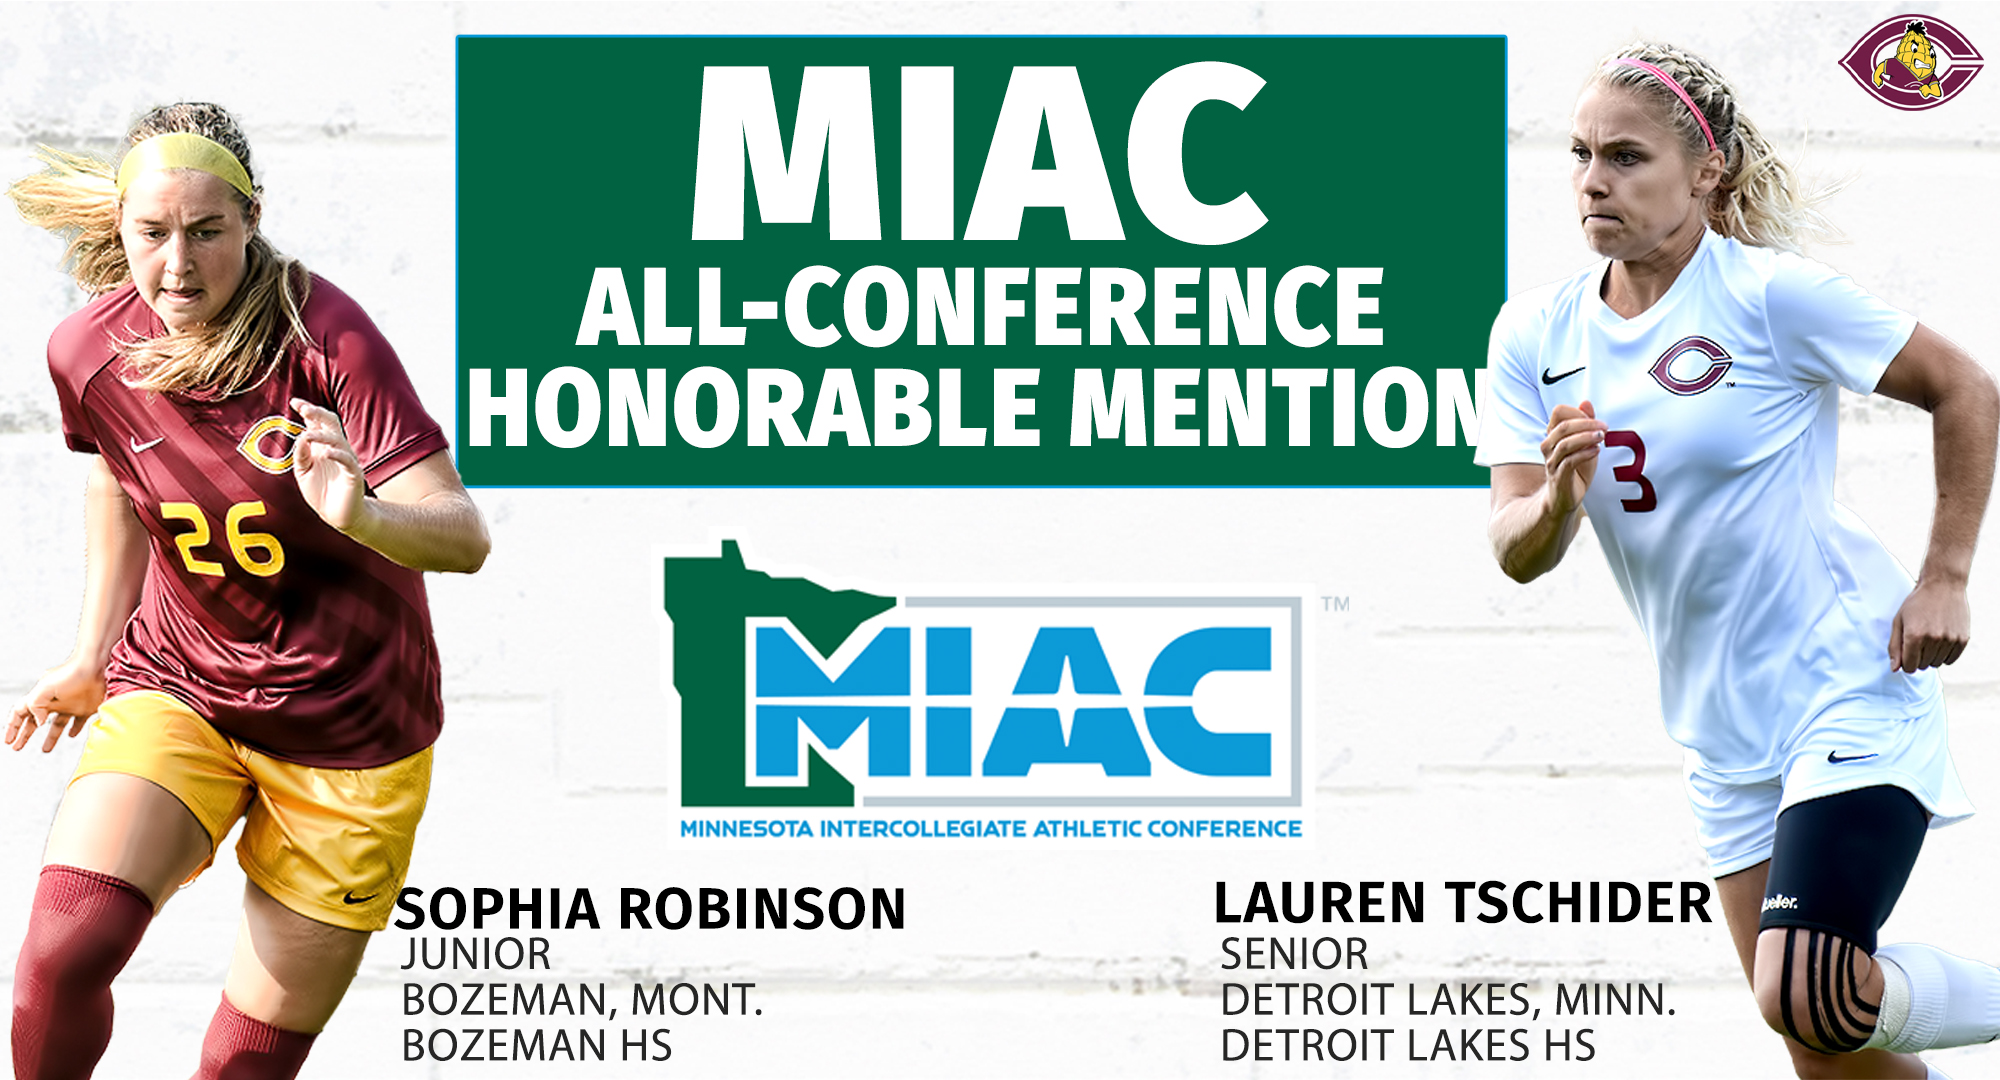 Senior Lauren Tschider and junior Sophia Robinson were both named to the MIAC All-Conference Honorable Mention Team.